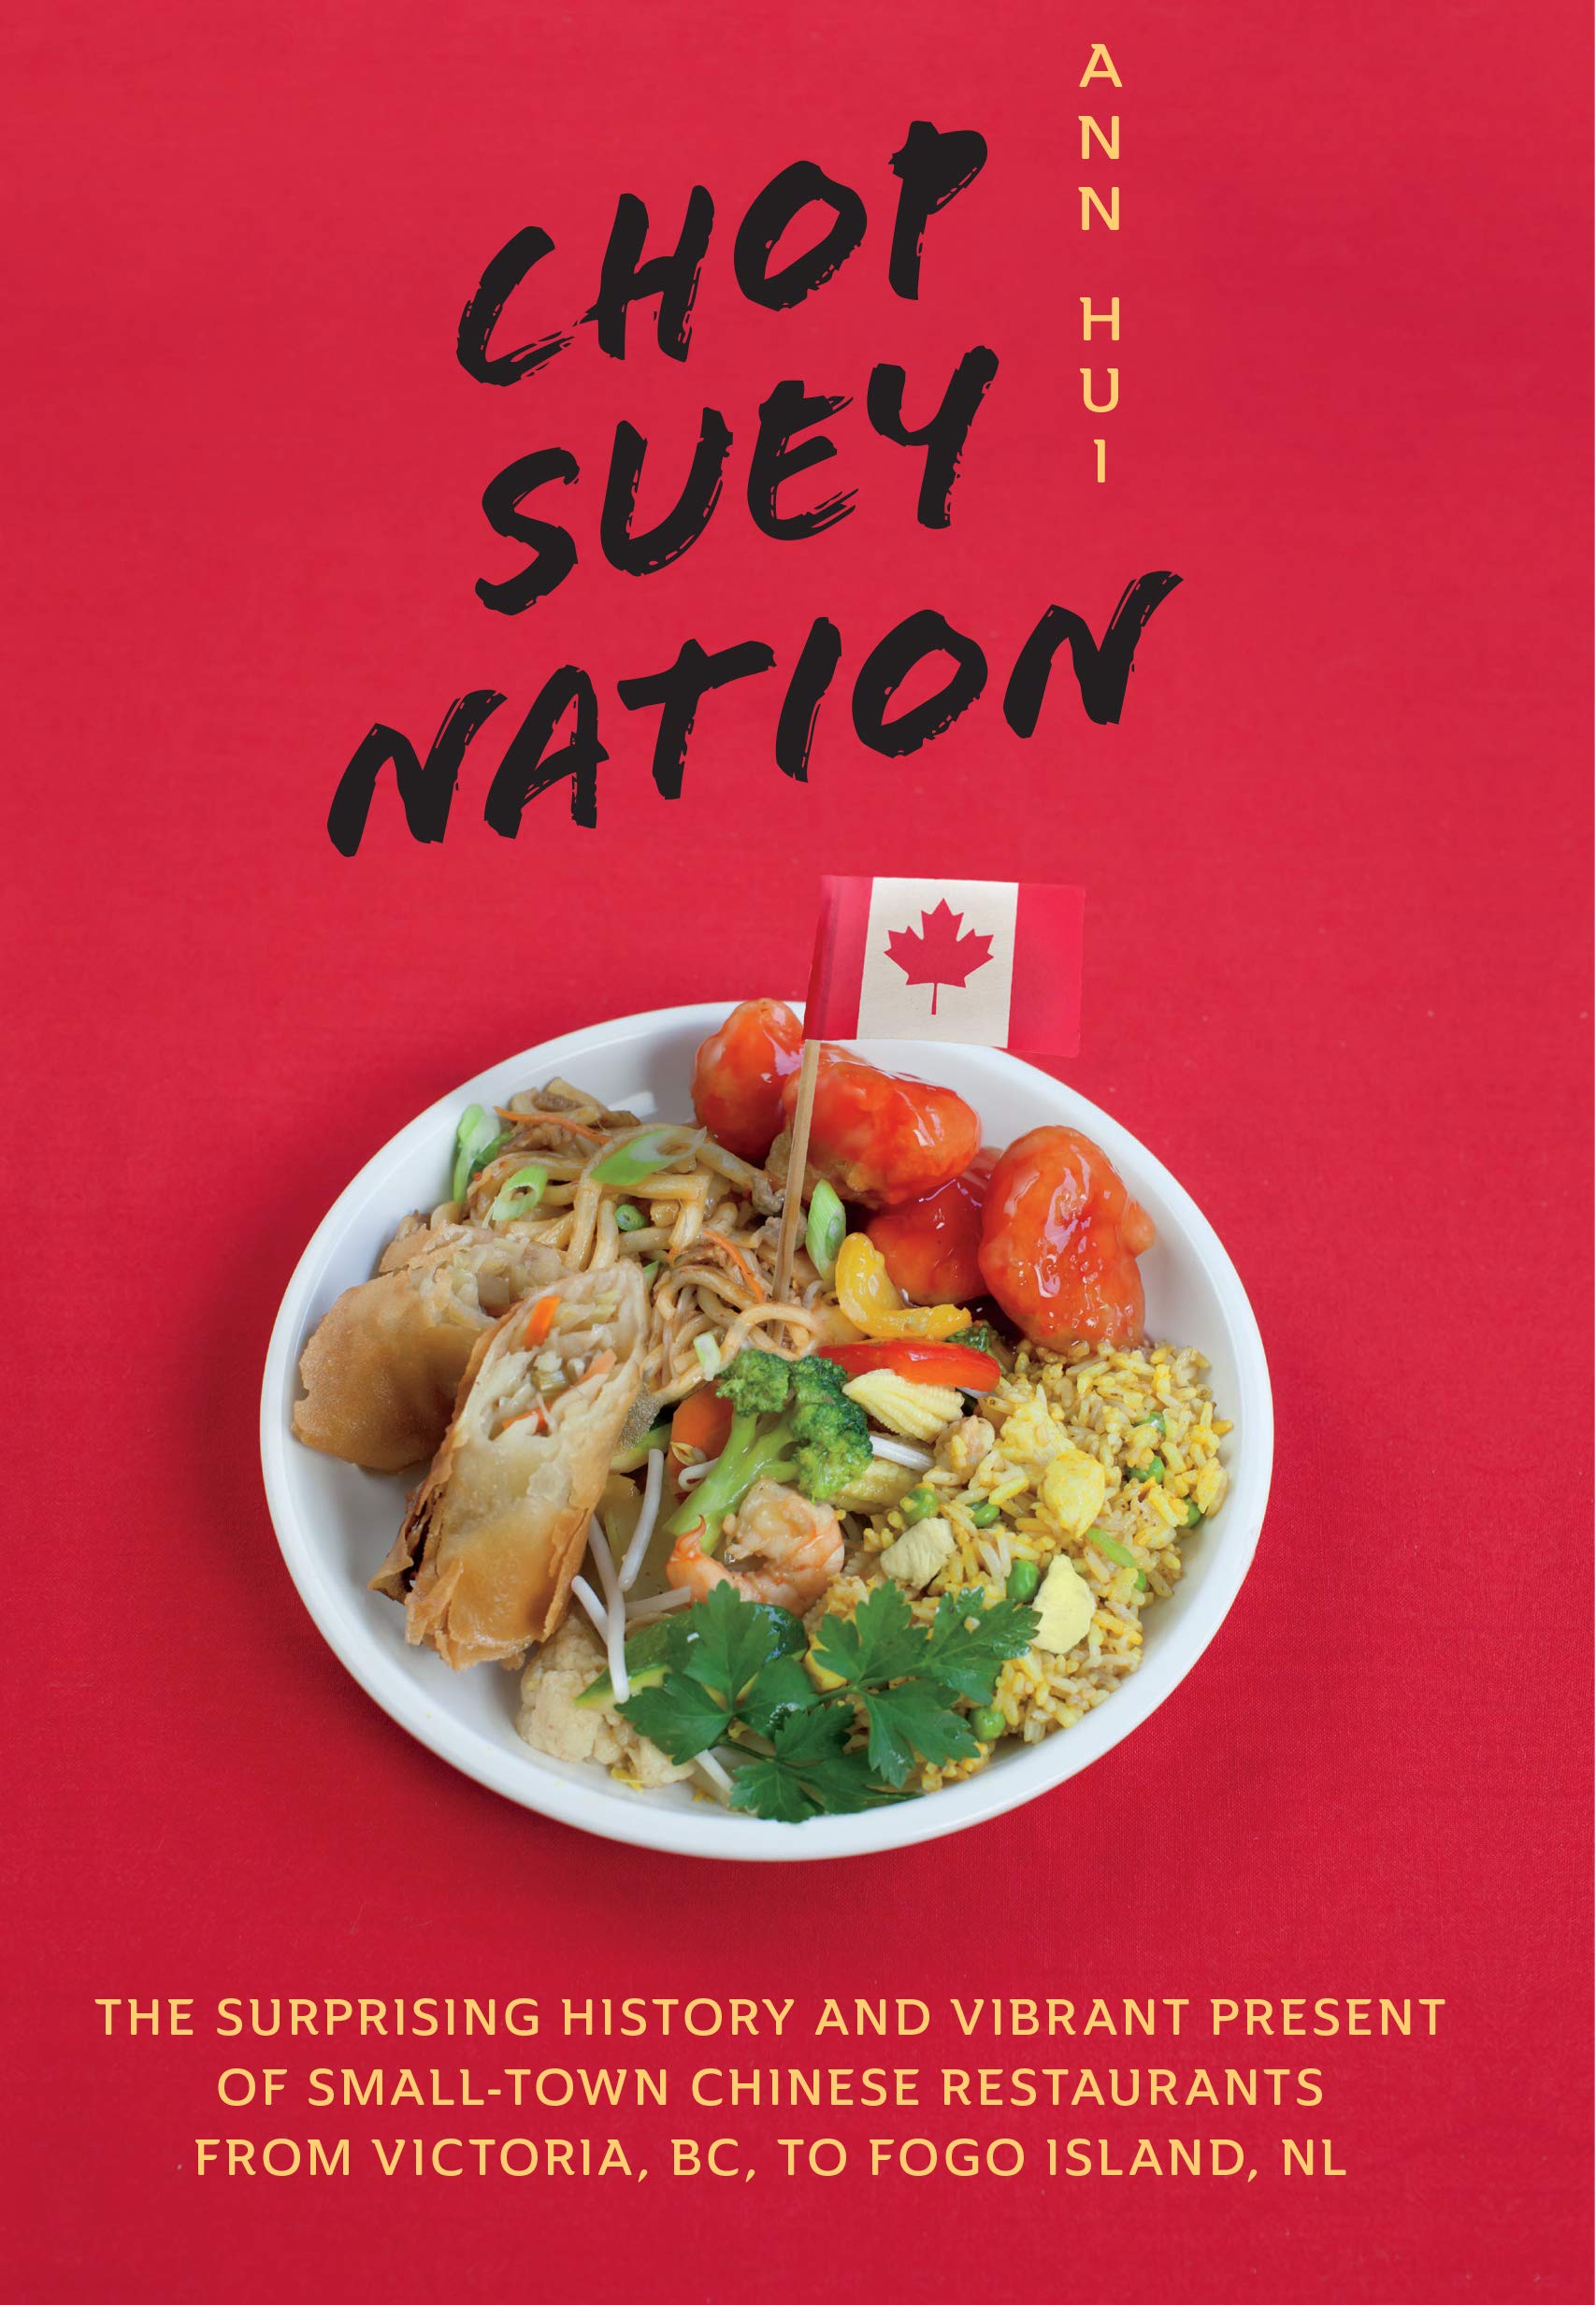 Chop Suey Nation: The Legion Cafe and Other Stories from Canada's Chinese Restaurants (Ann Hui)